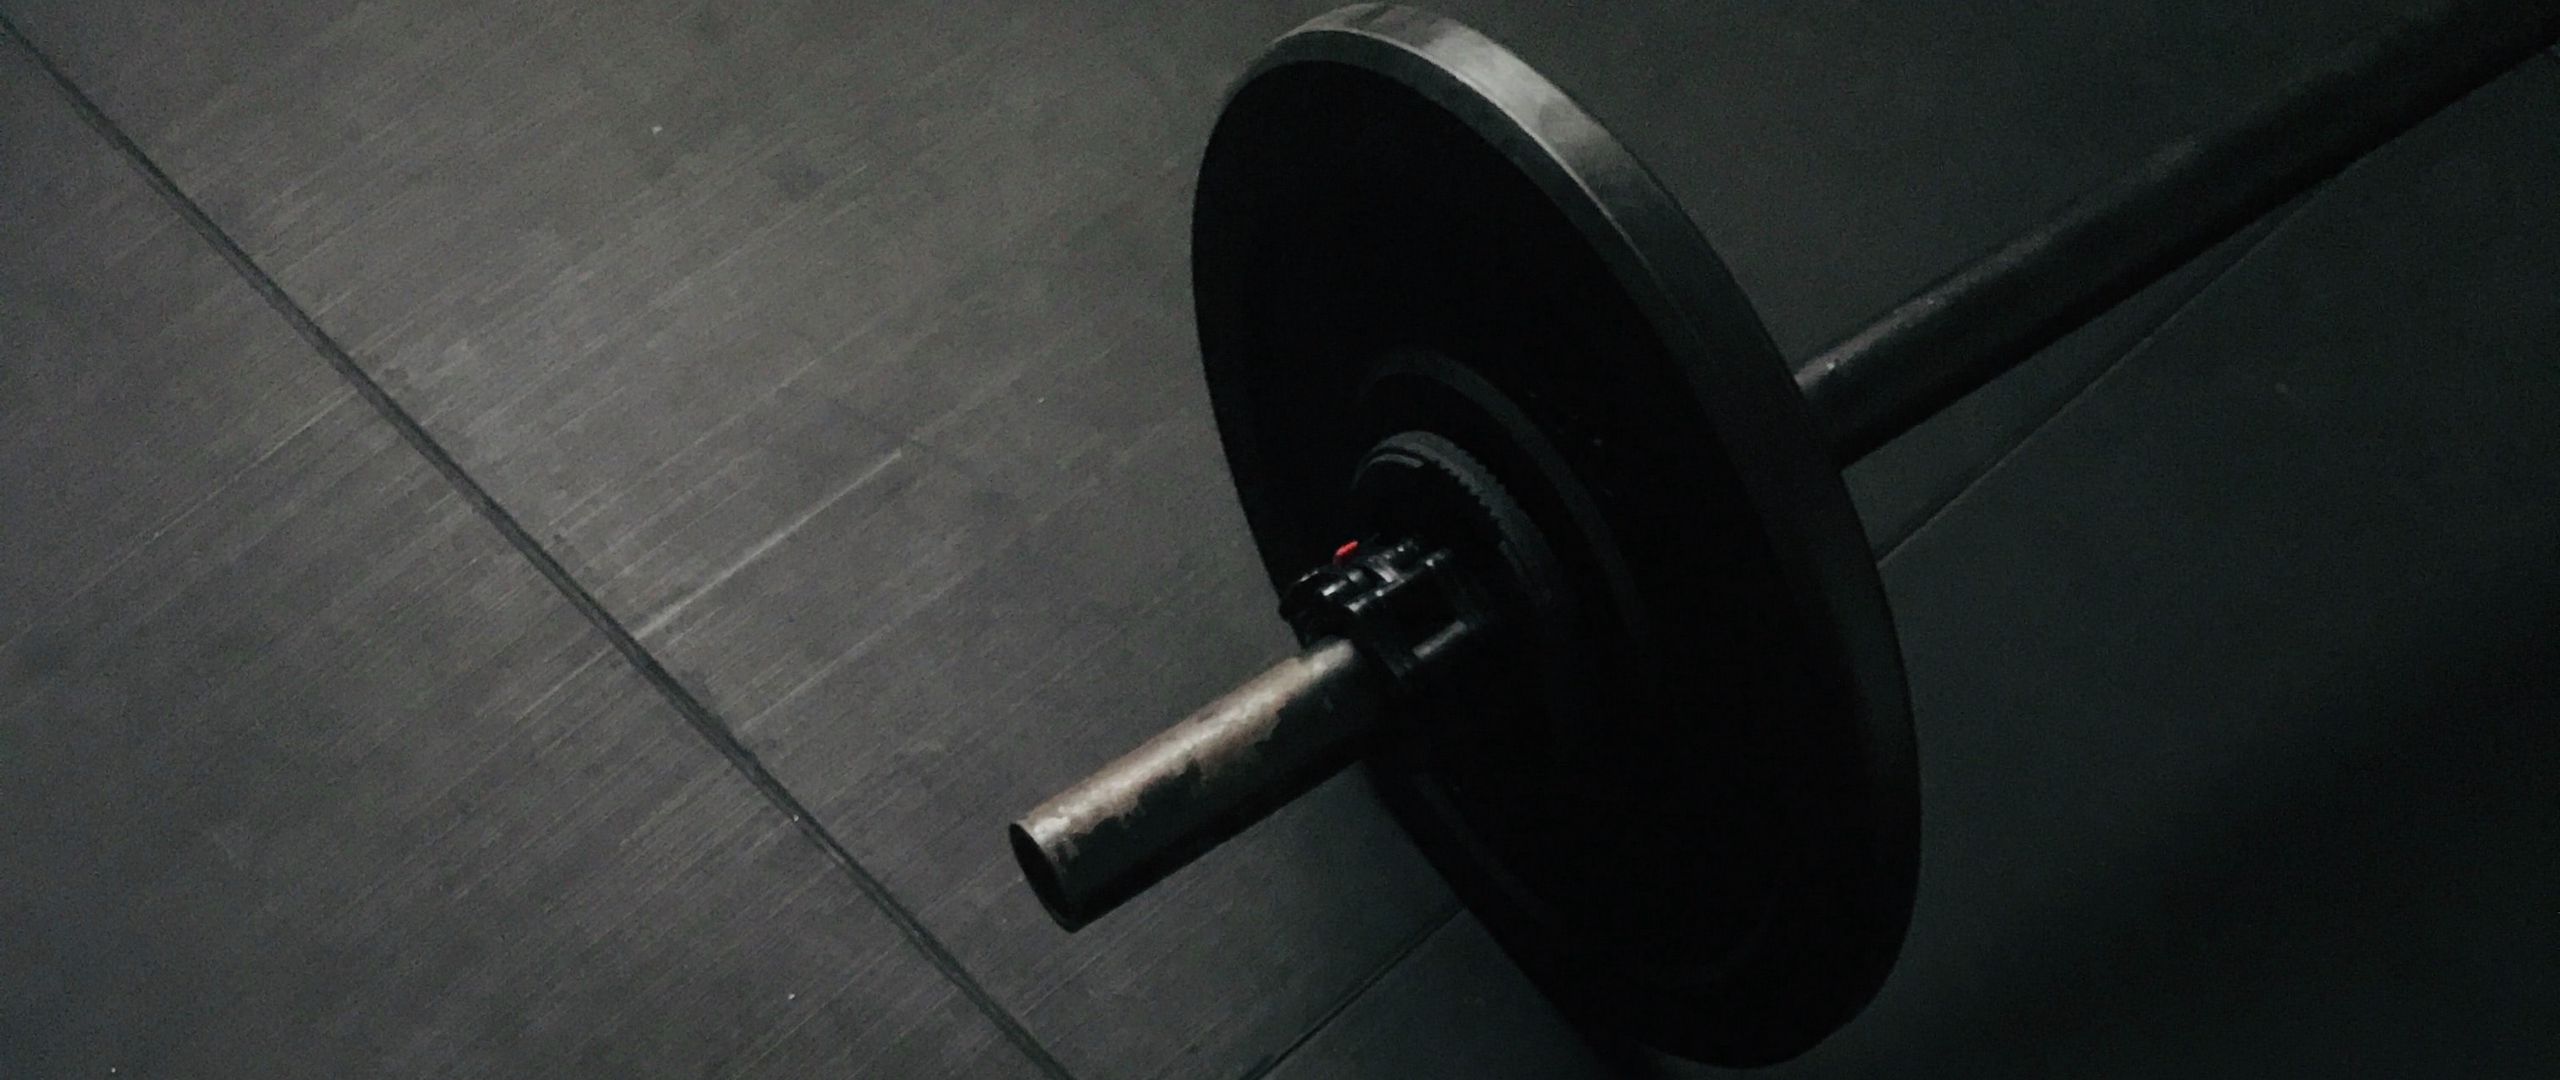 Download wallpaper 2560x1080 ball, barbell, crossfit, bodybuilding, gym  dual wide 1080p hd background